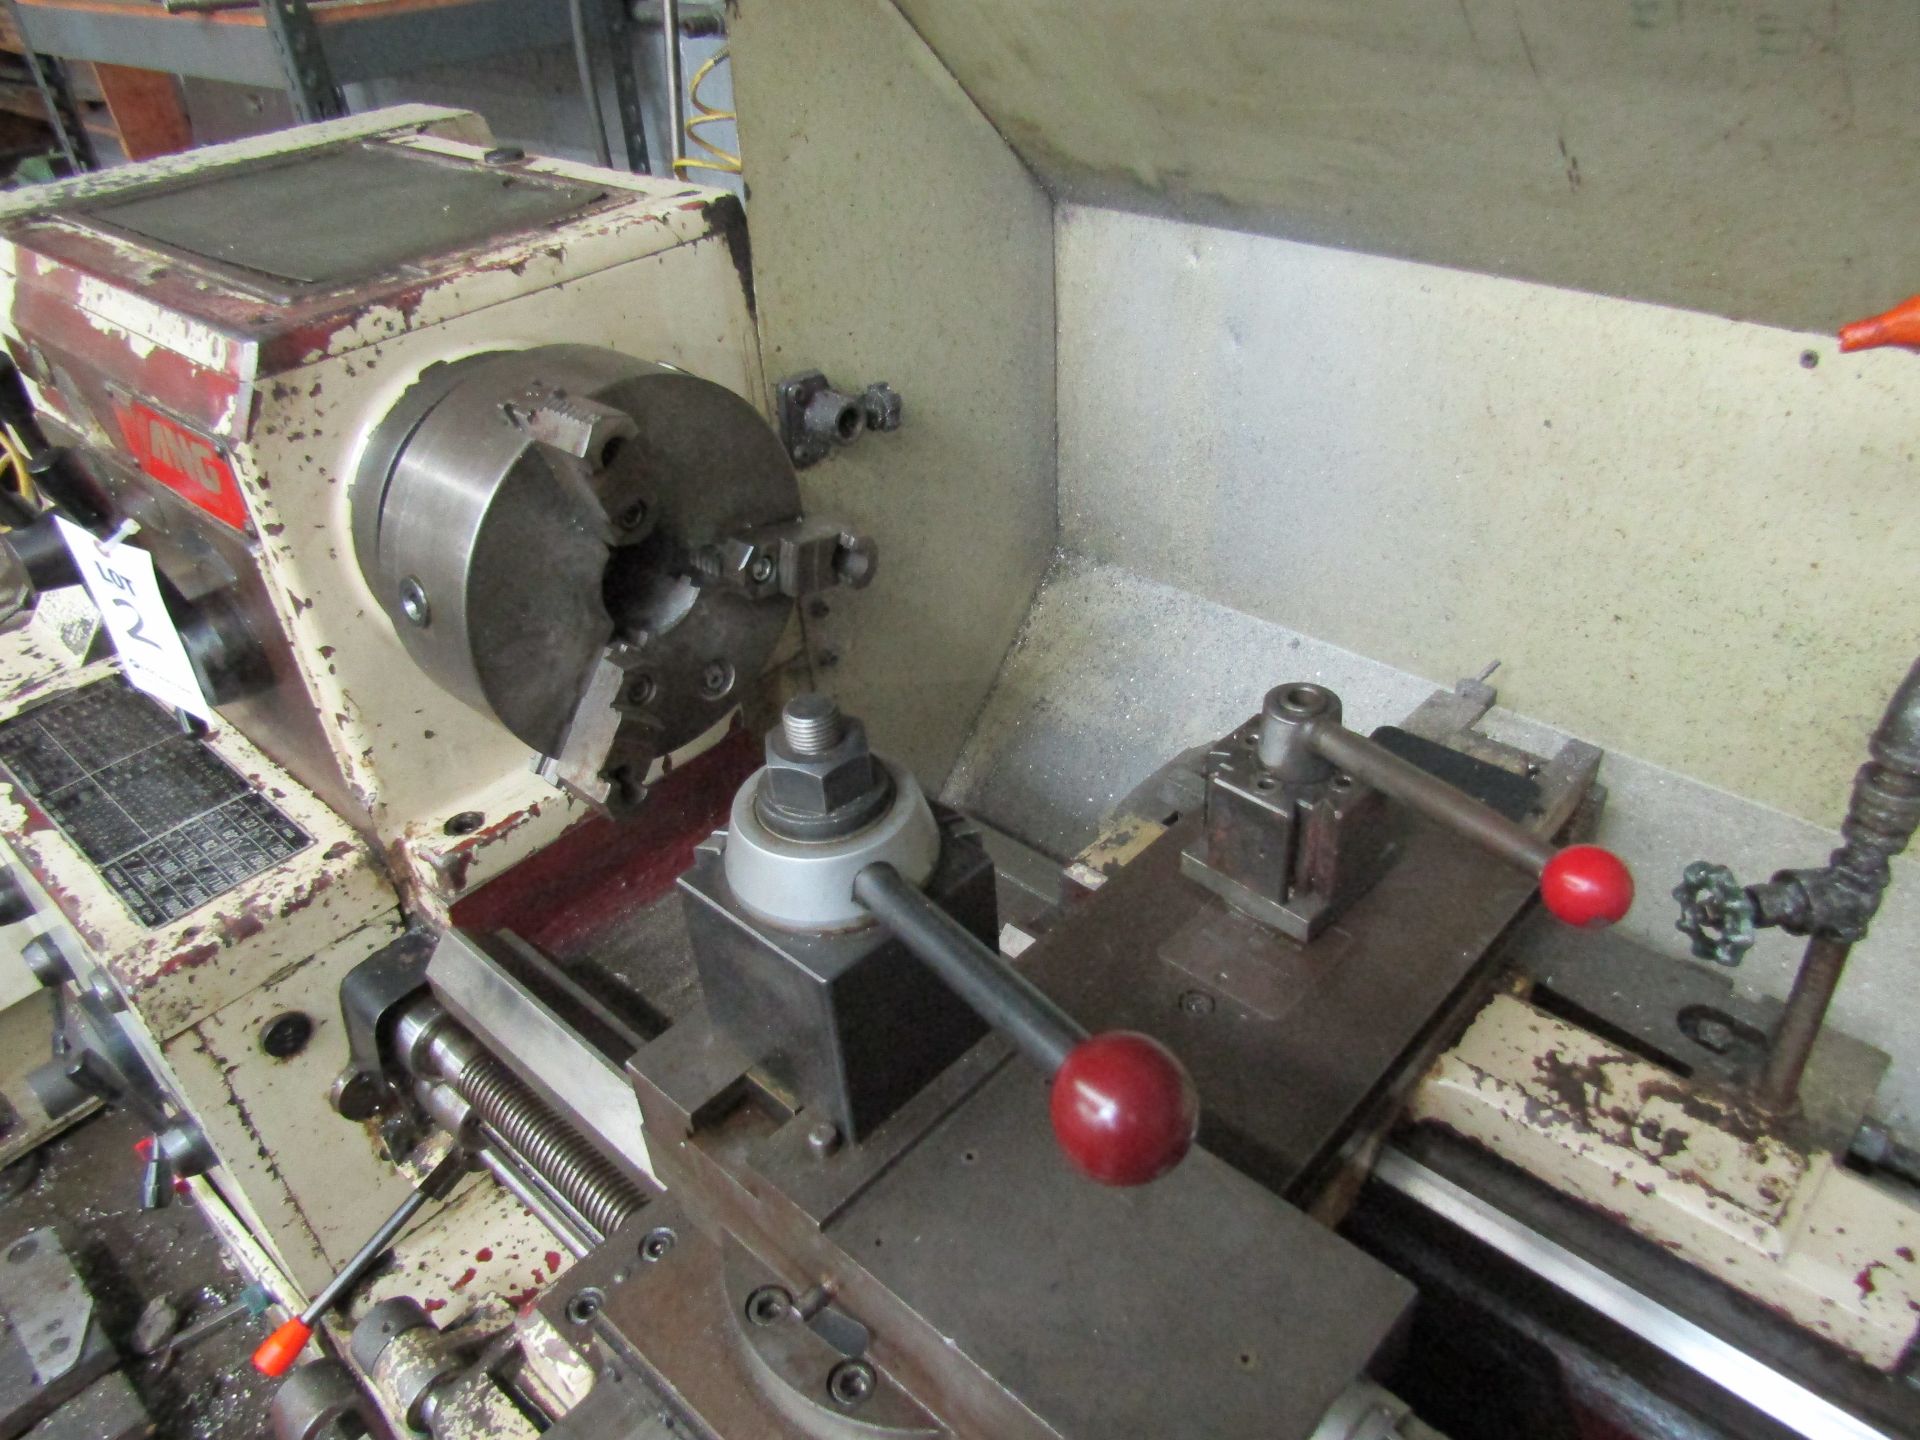 1995 YANG ENGINE LATHE, MODEL YANG-CL48150G, SERIAL B92668, WITH ASSOCIATED TOOL HOLDERS AND TOOLING - Image 3 of 8